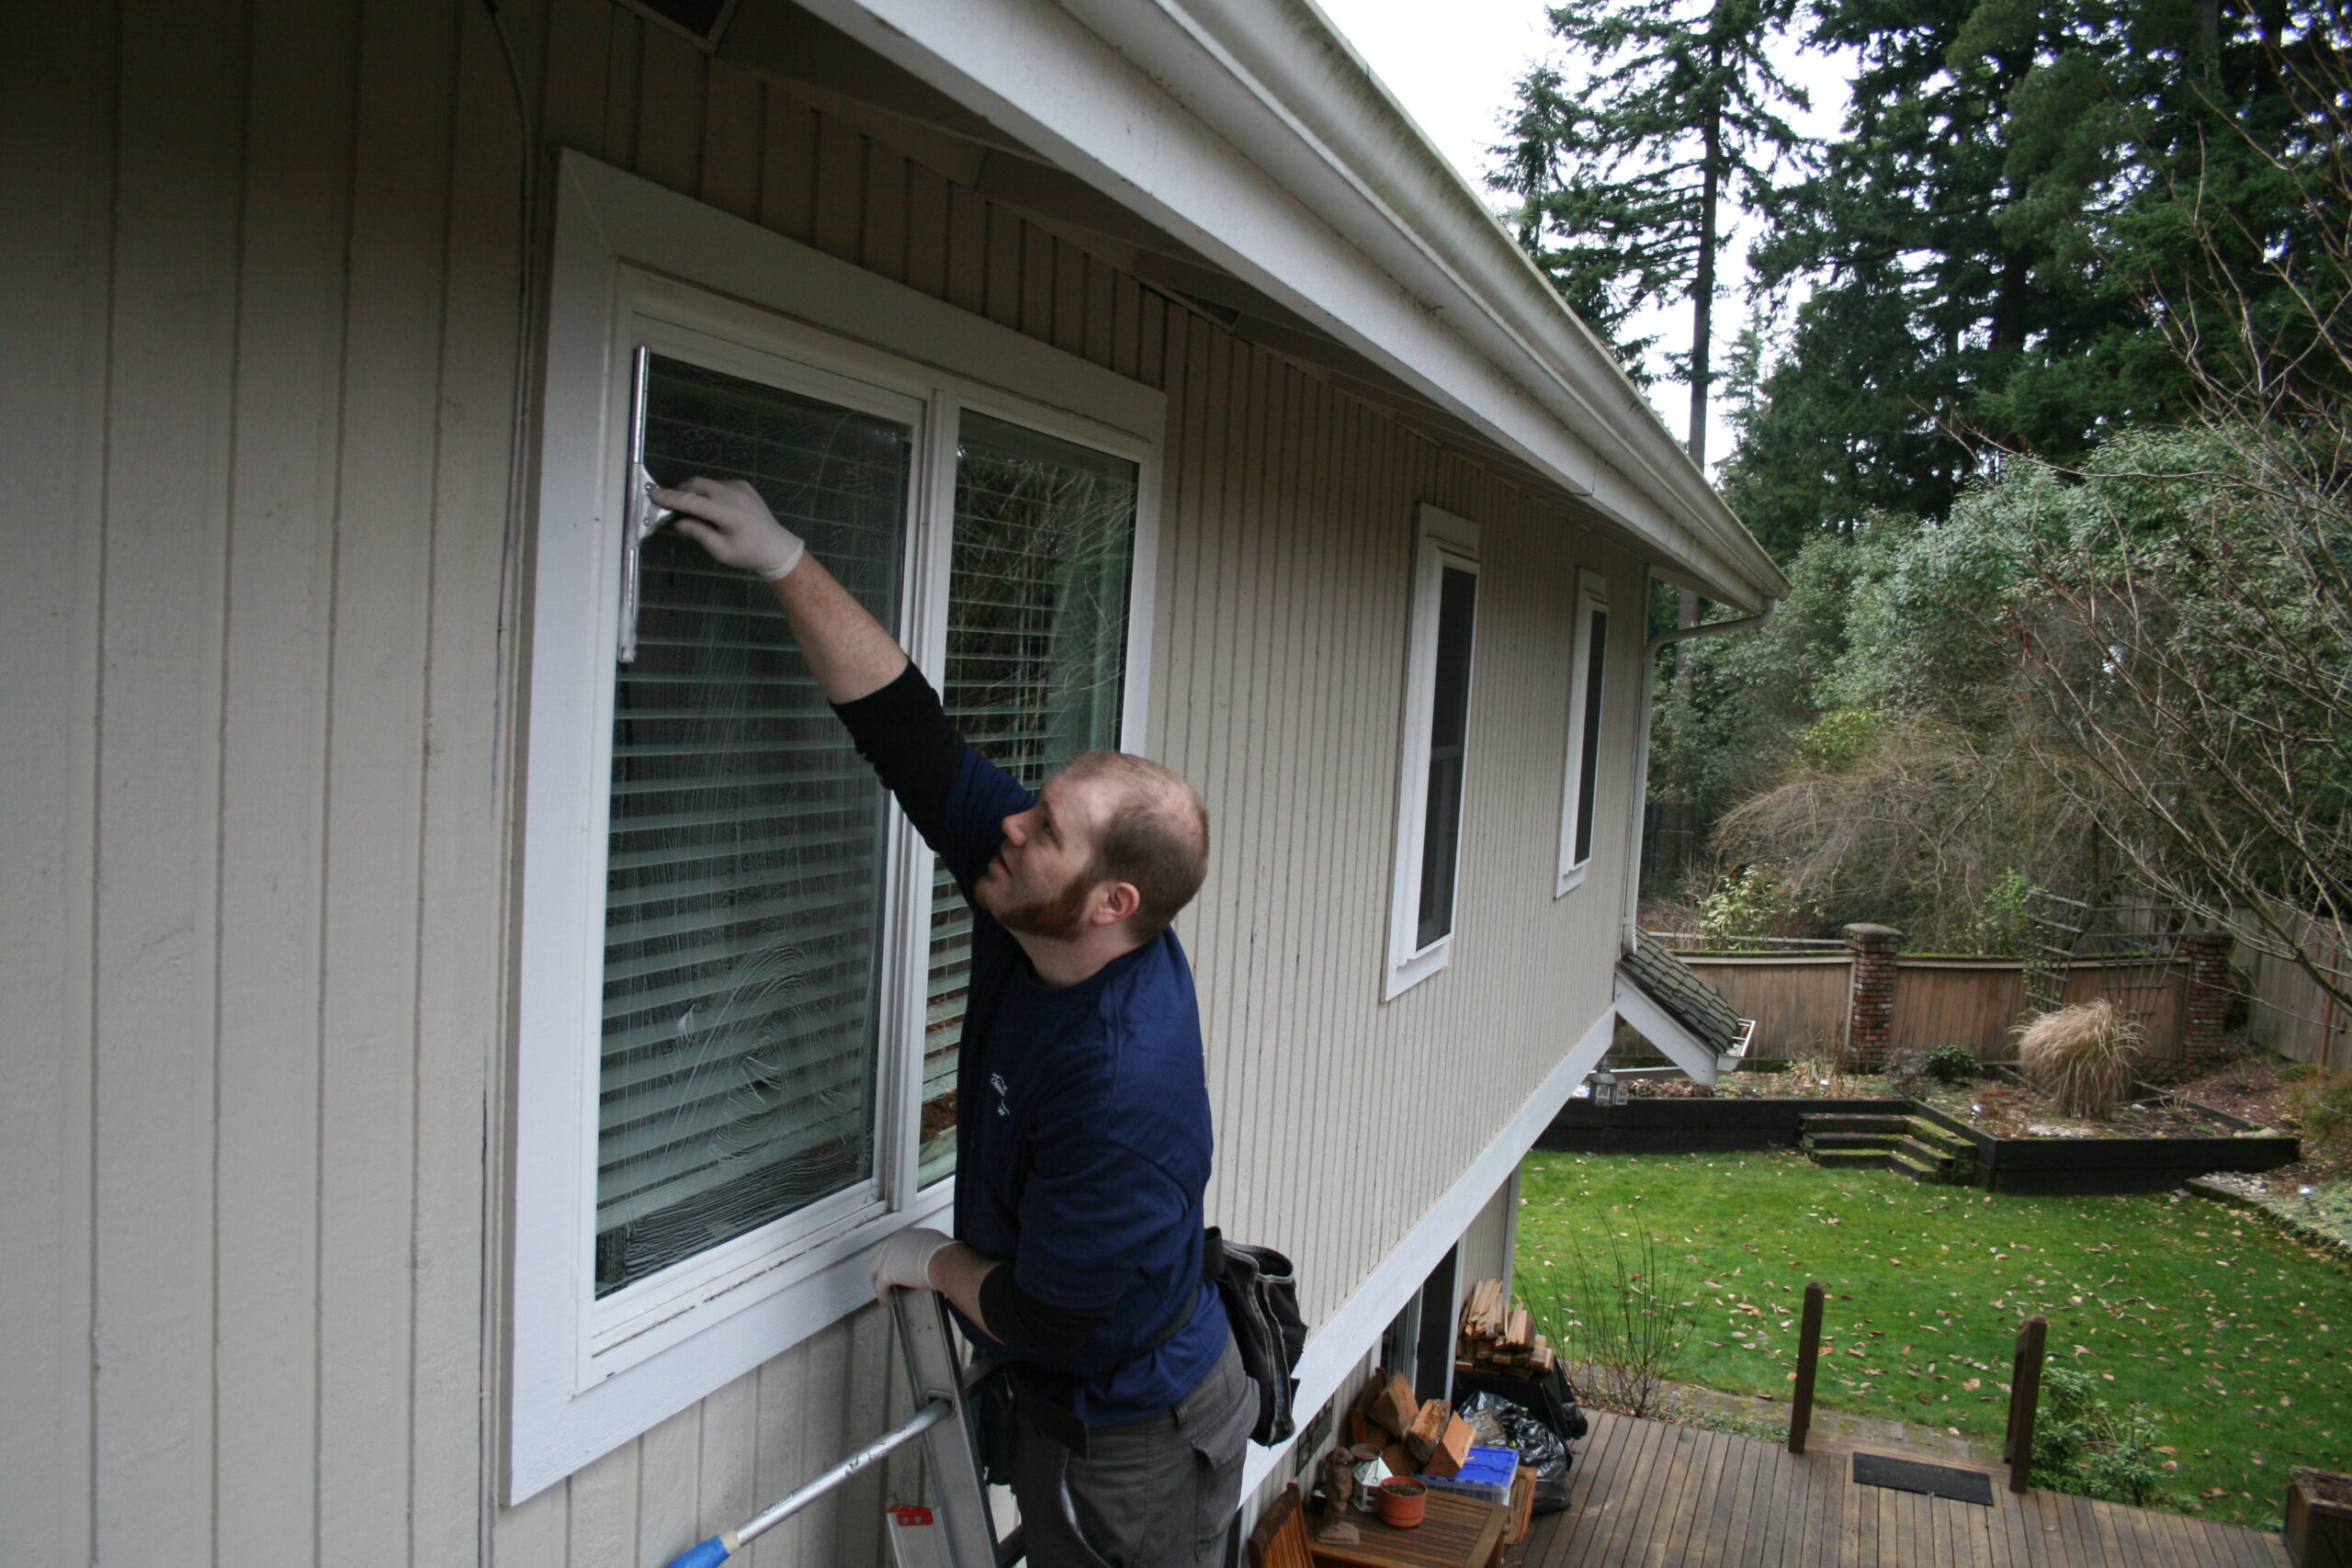 Novelty Hill window cleaning service company Chinook Services cleans a window on a two story local home